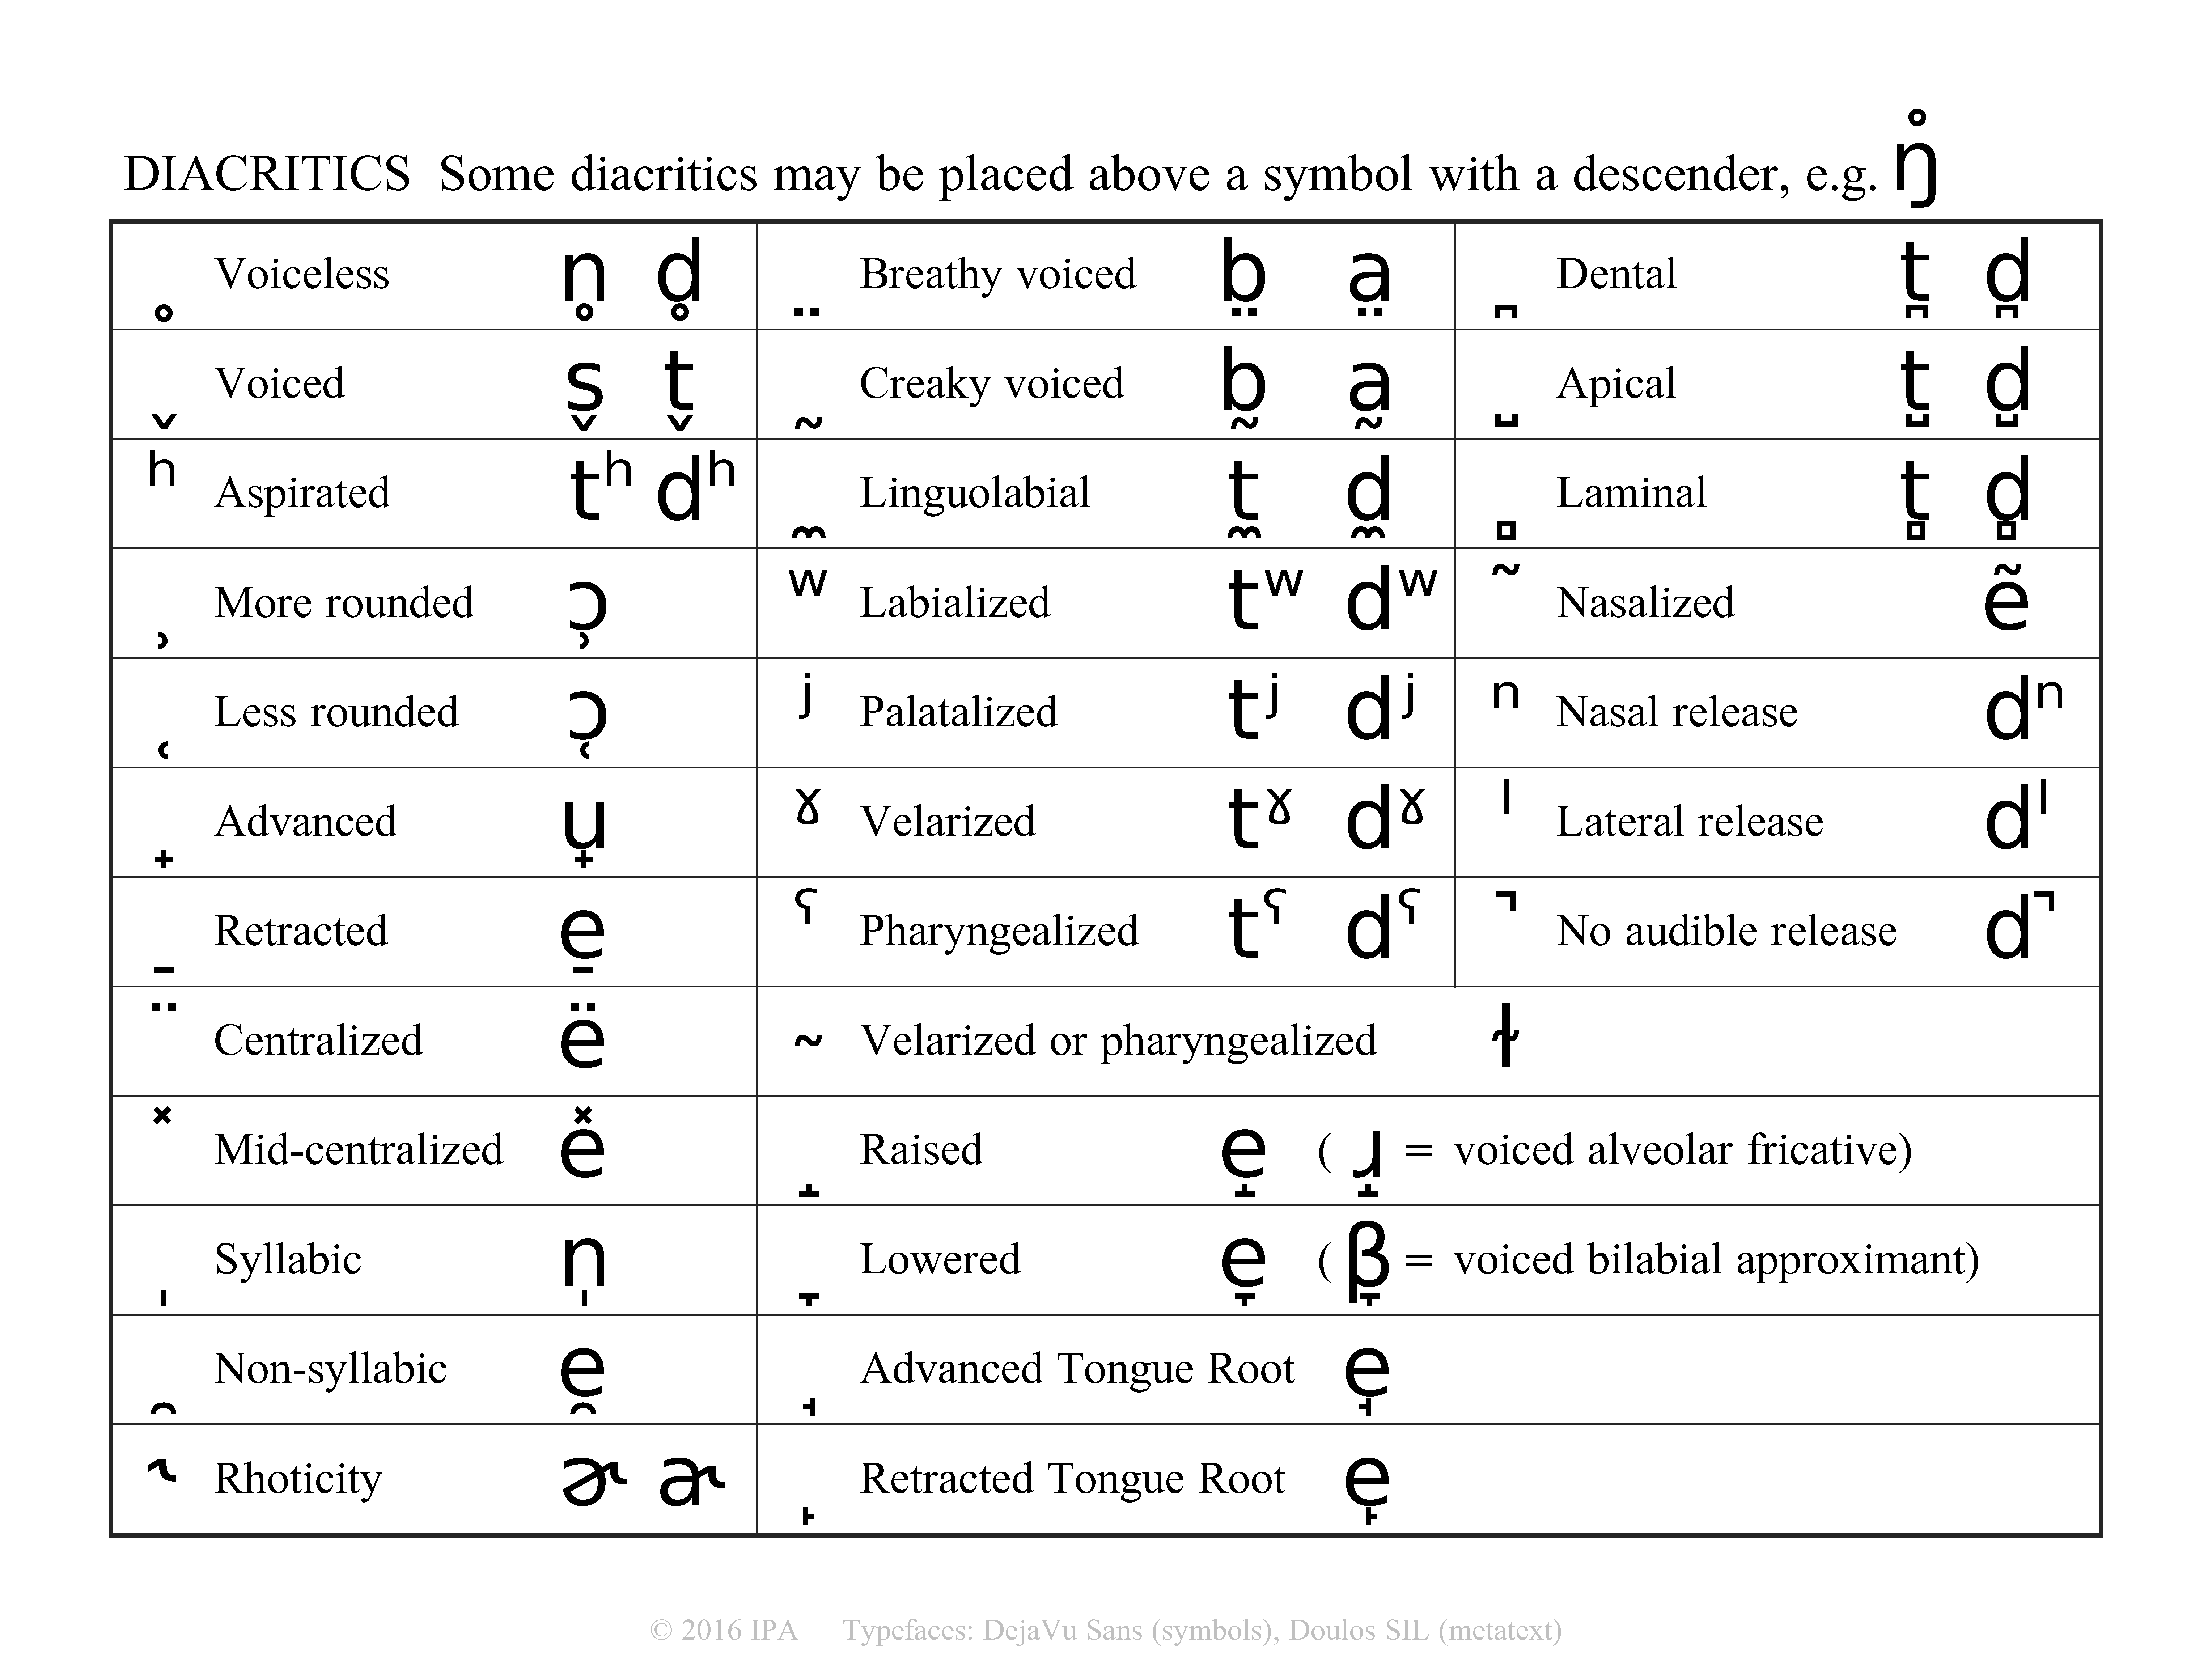 Phonemic Chart With Examples Pdf